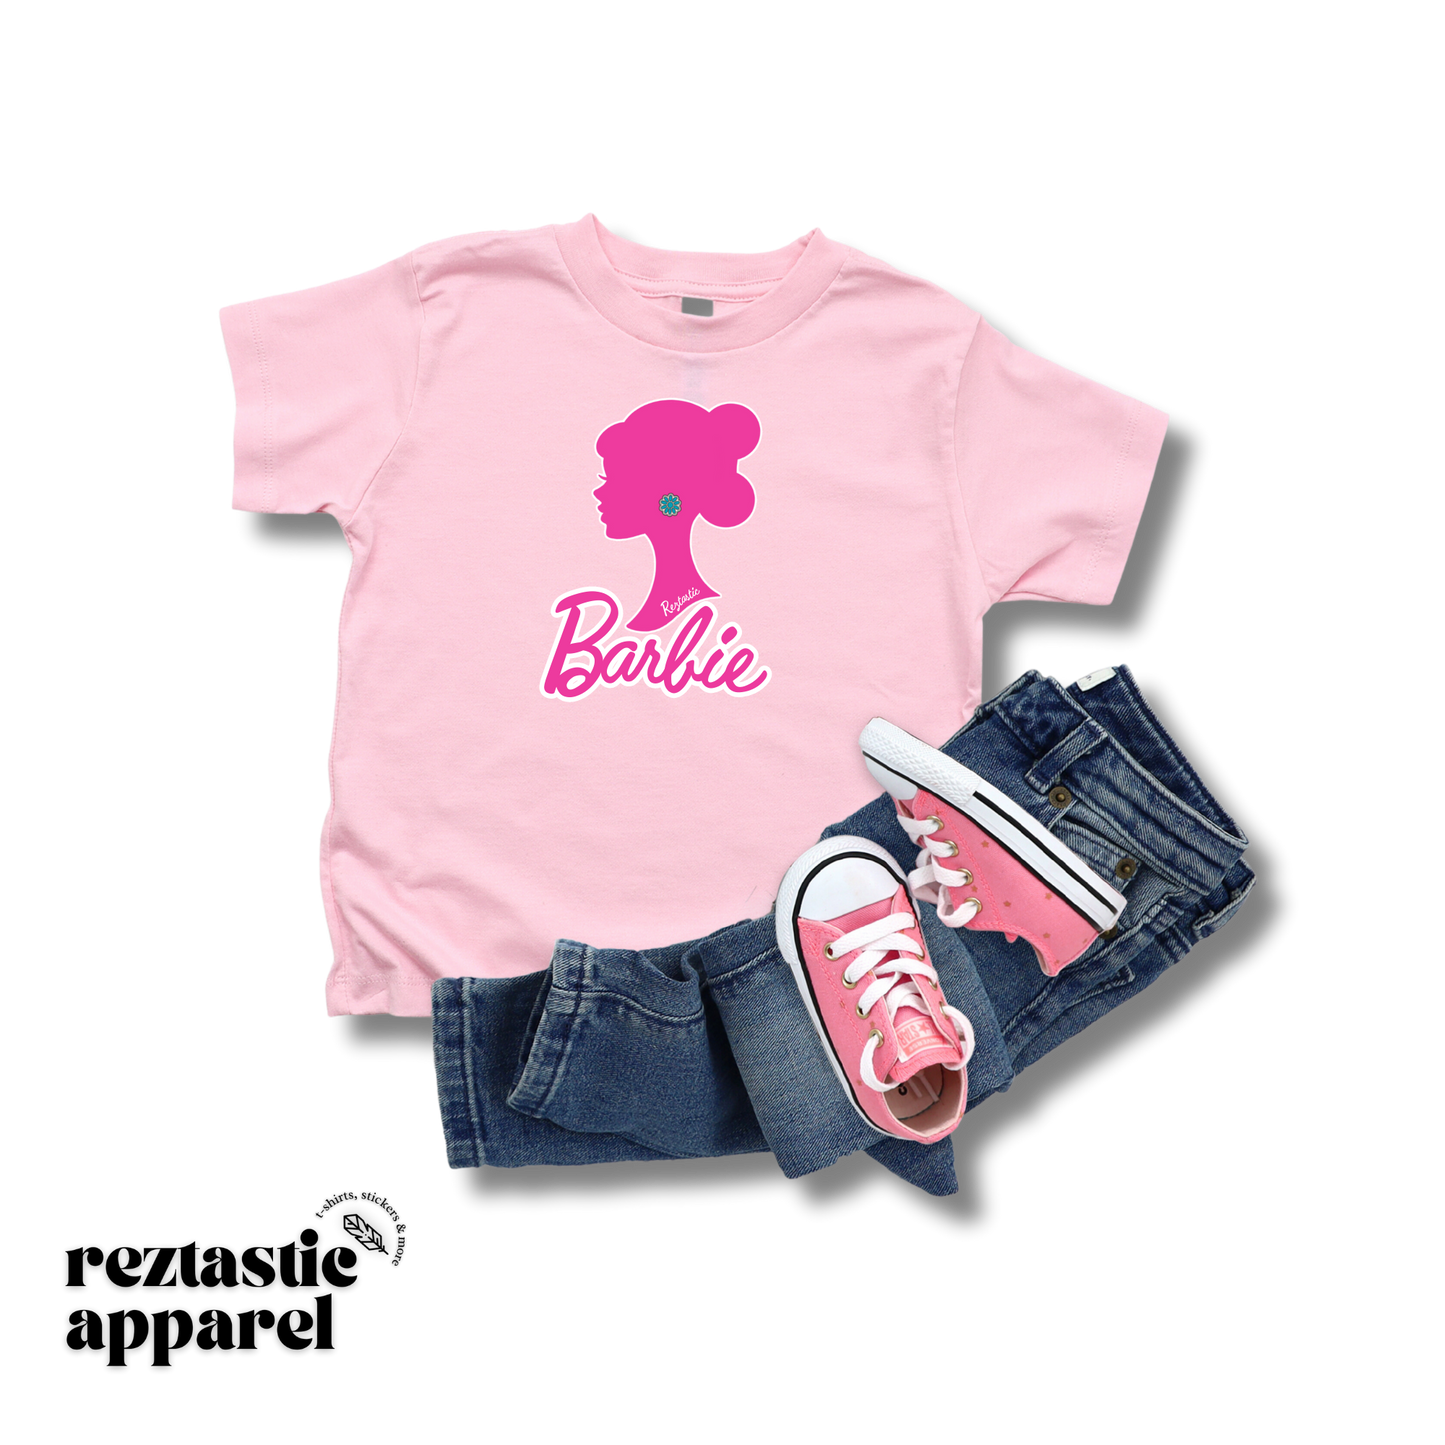 Barbie - T-Shirt- Toddlers